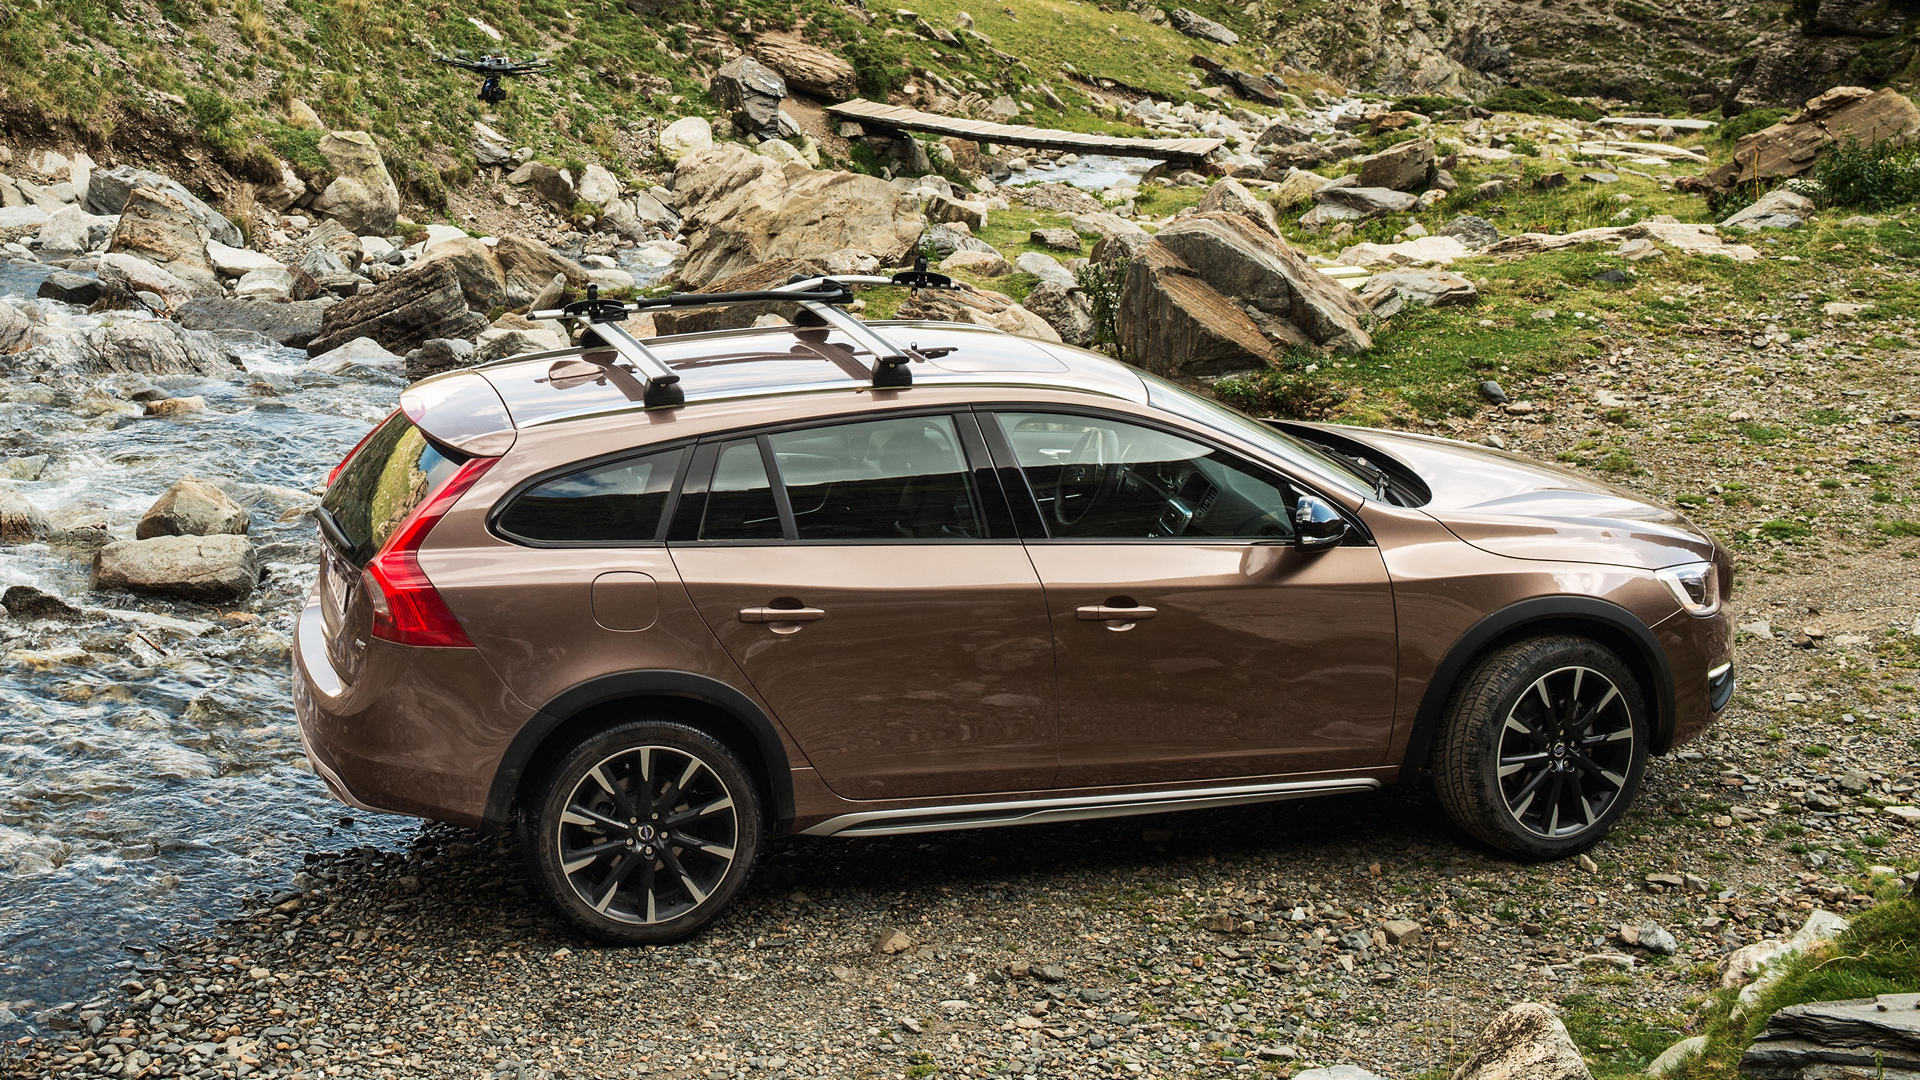 2016 Volvo V60 Cross Country © Zhejiang Geely Holding Group Co., Ltd